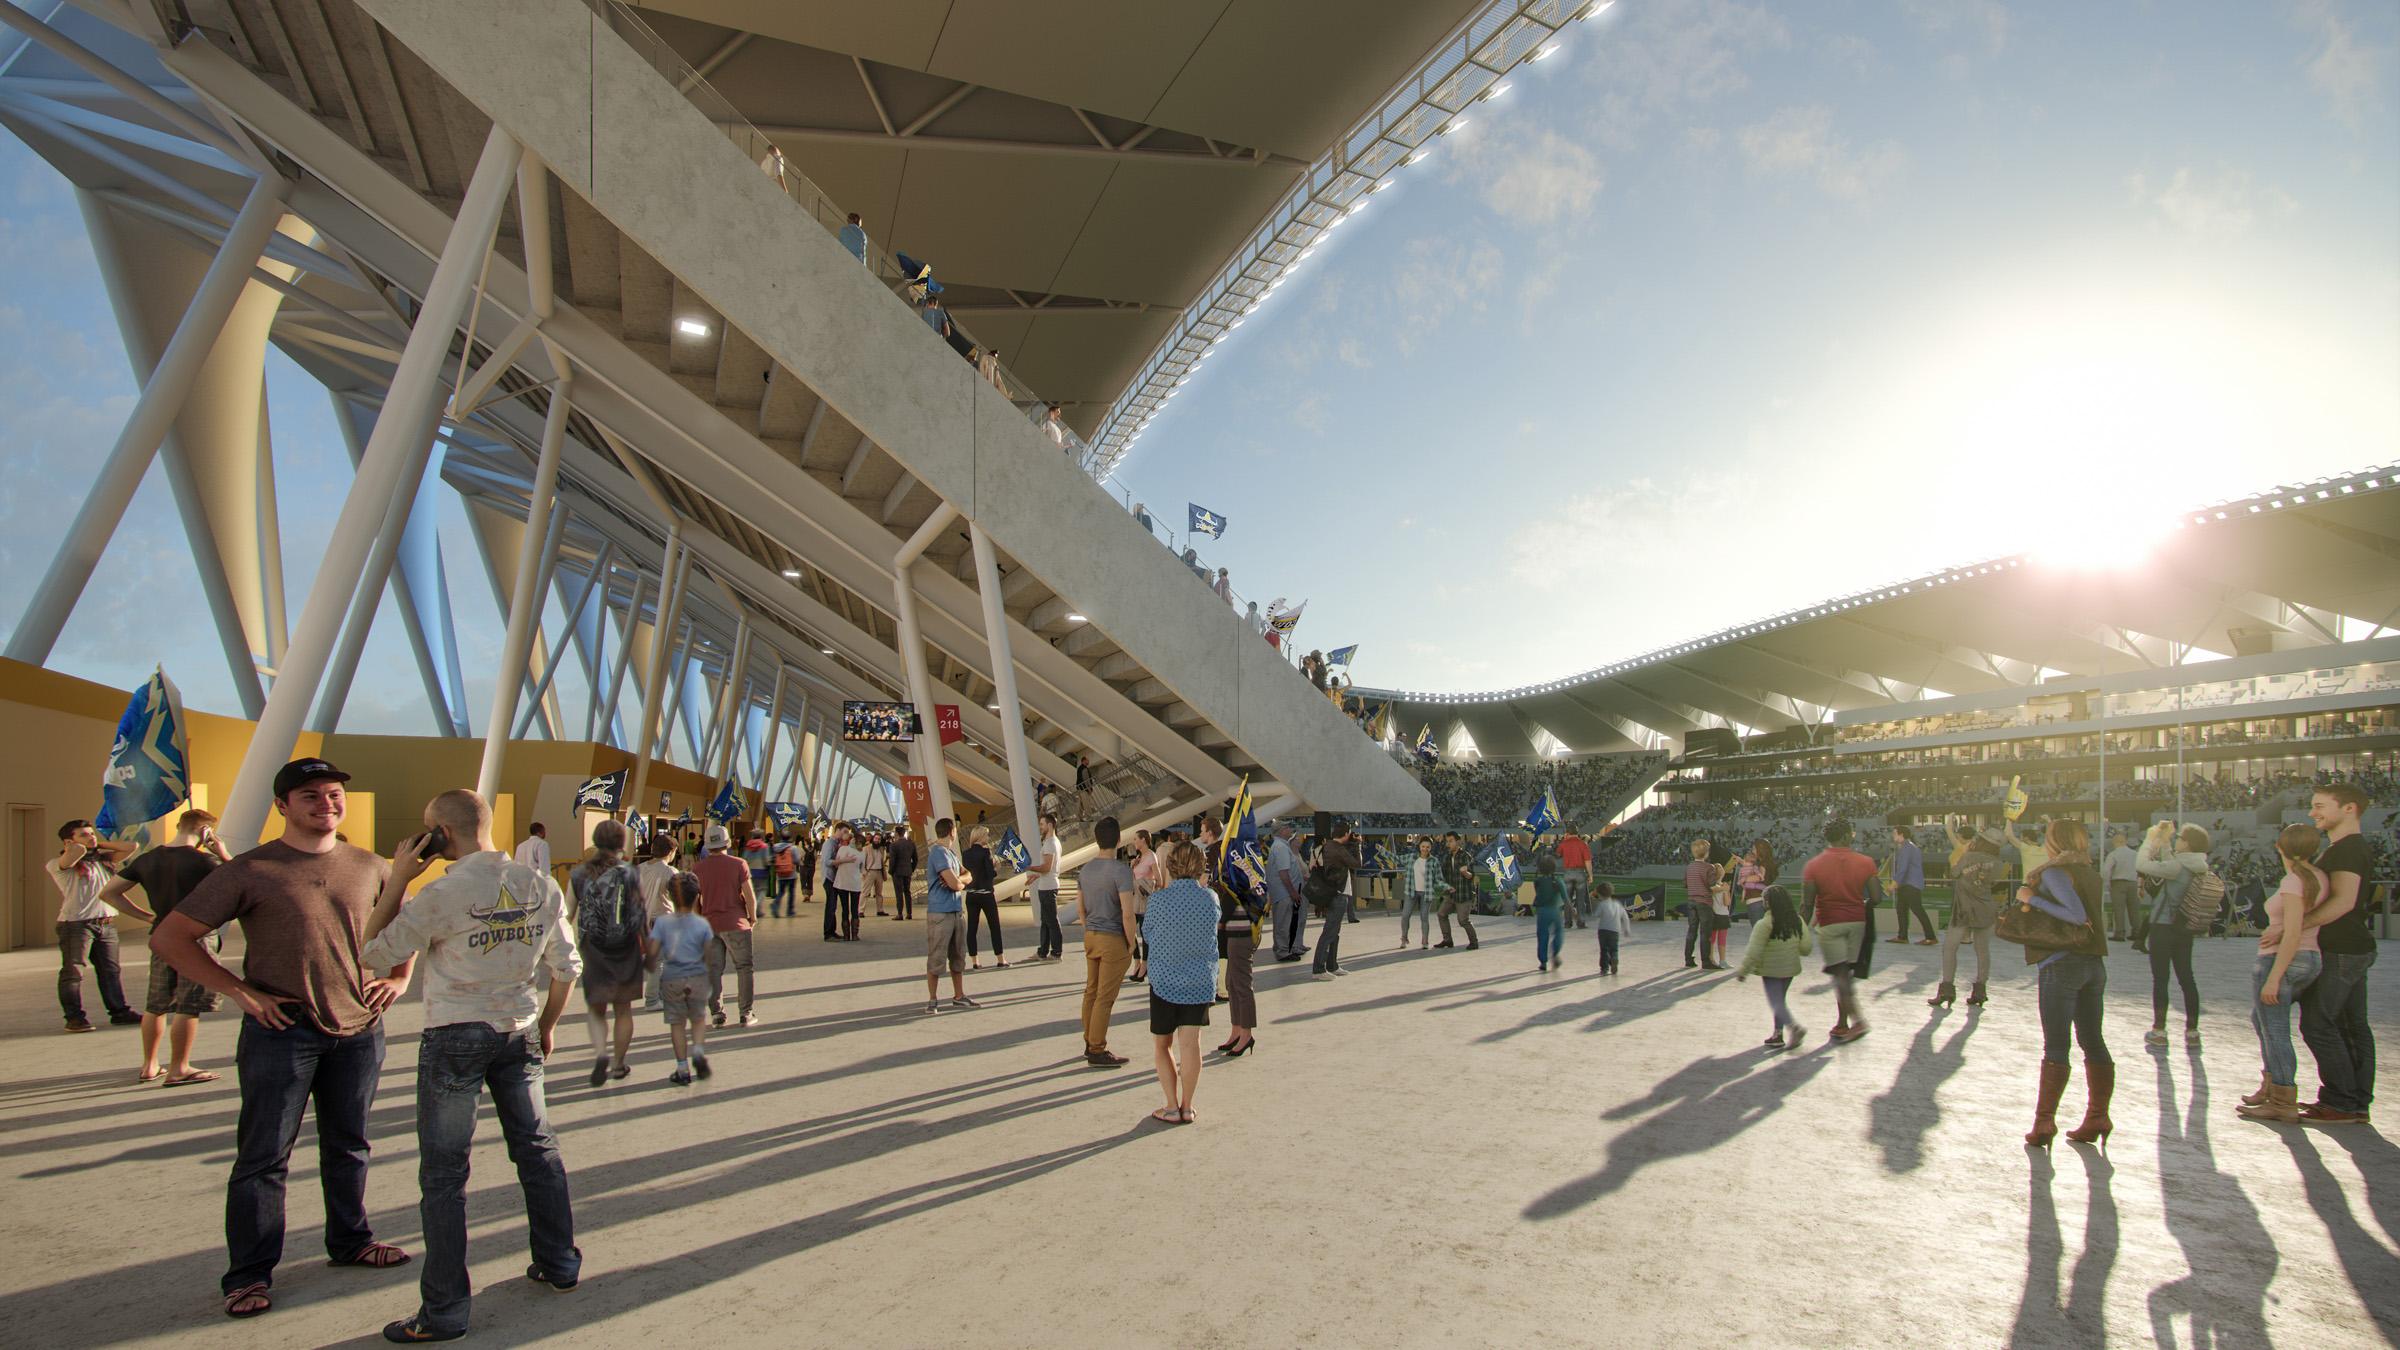 Computer-rendered ground view of Townsville Stadium, with people walking around the arena